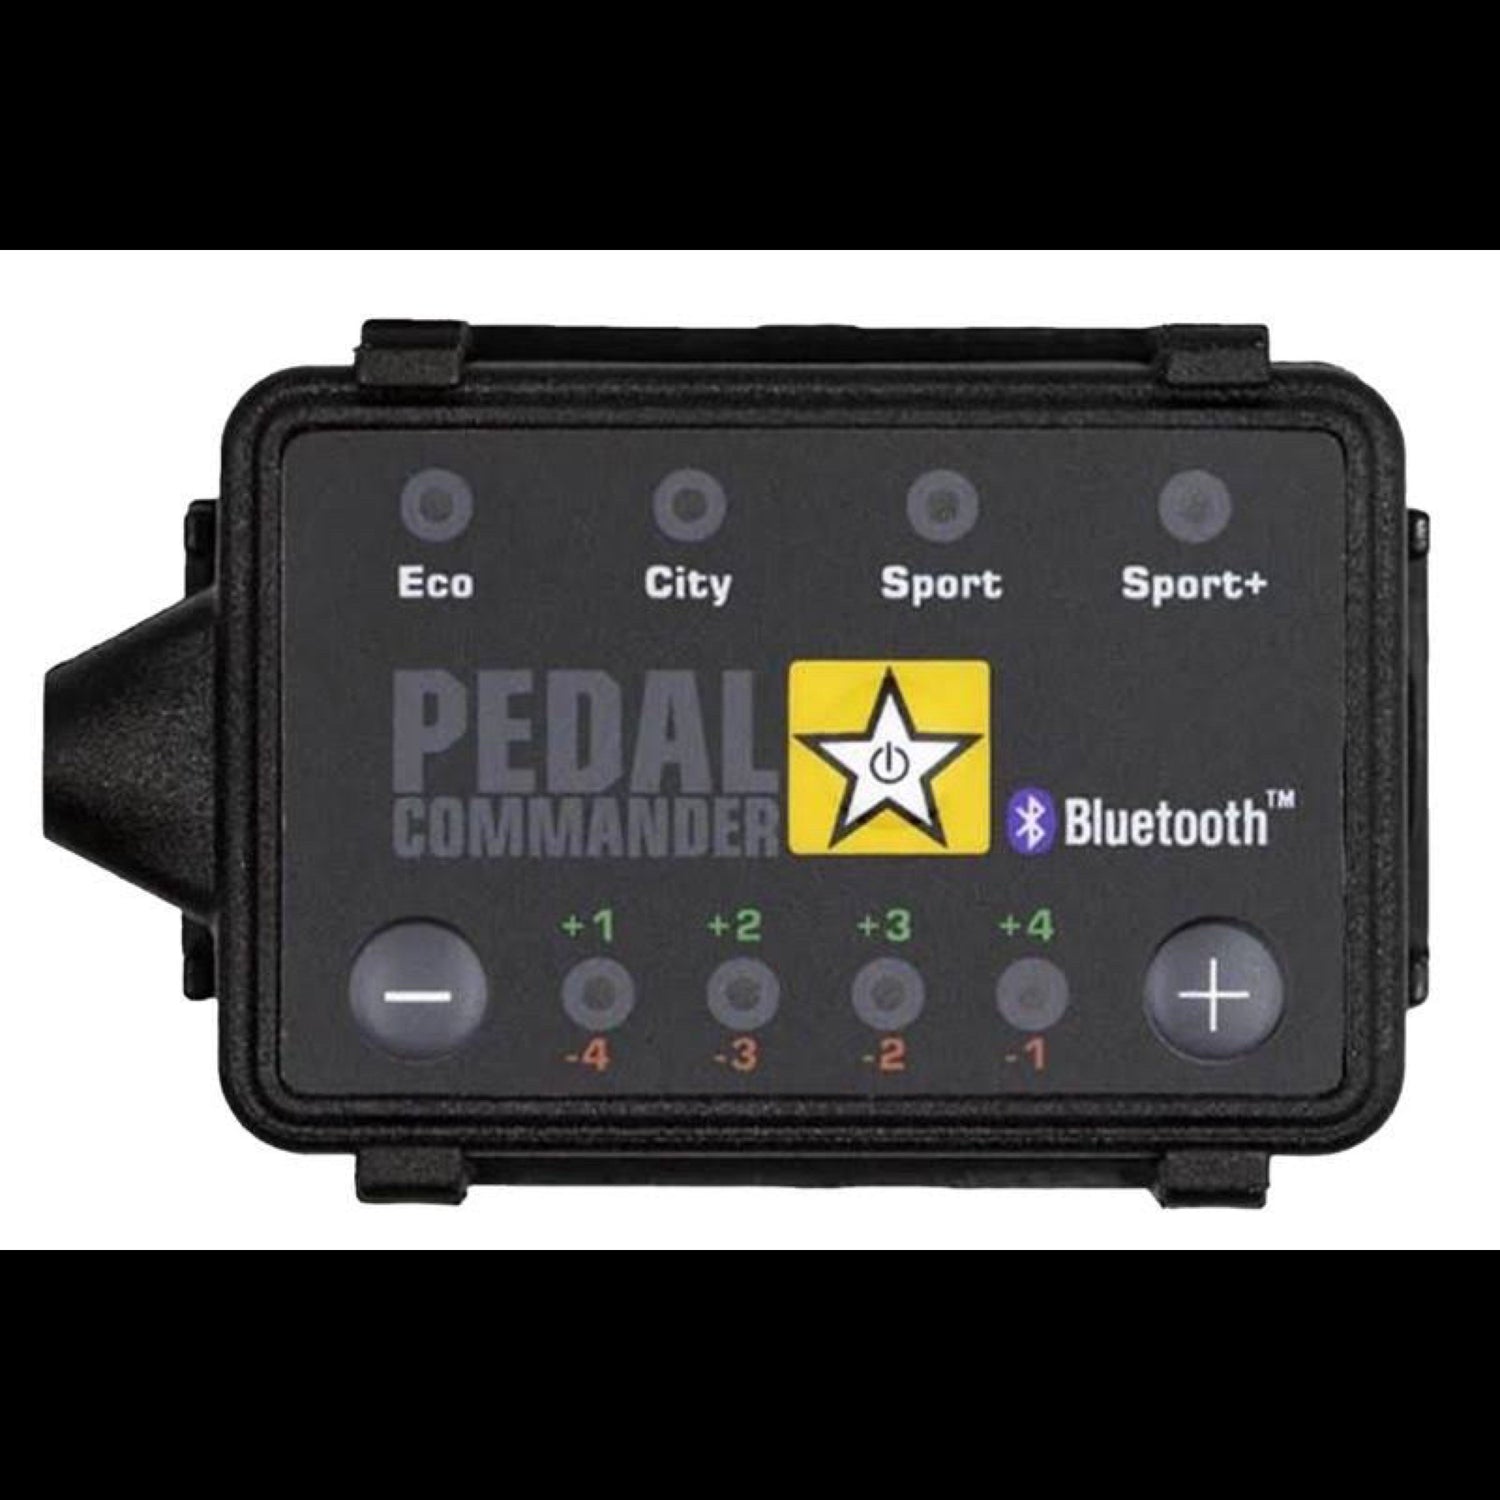 Pedal Commander with bluetooth in black